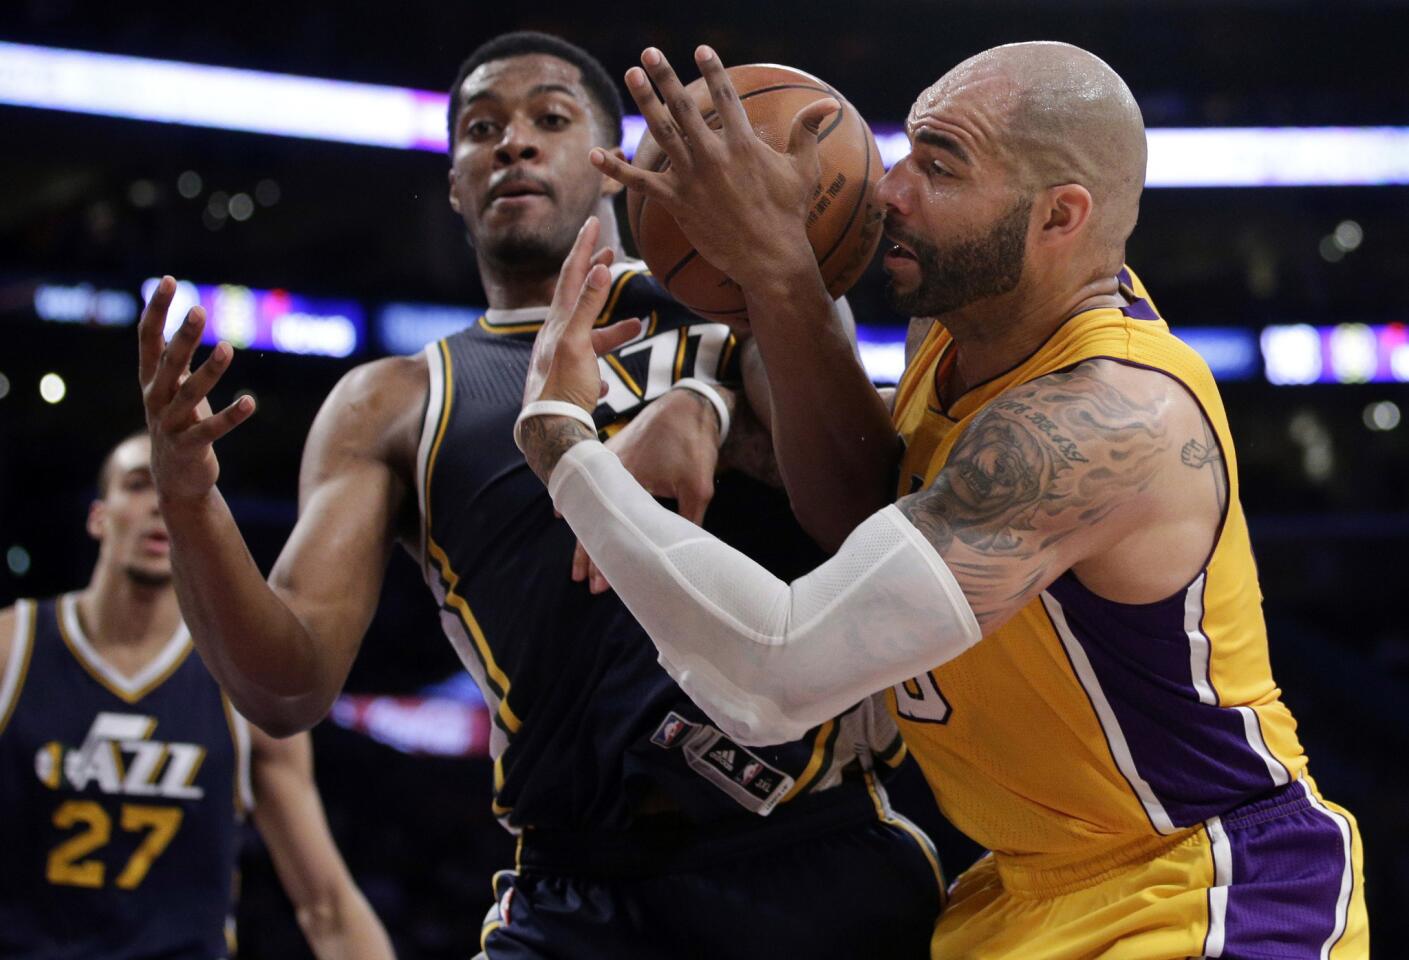 Lakers forward Carlos Boozer and Jazz center Derrick Favors get tangled battling for a rebound in the second half.